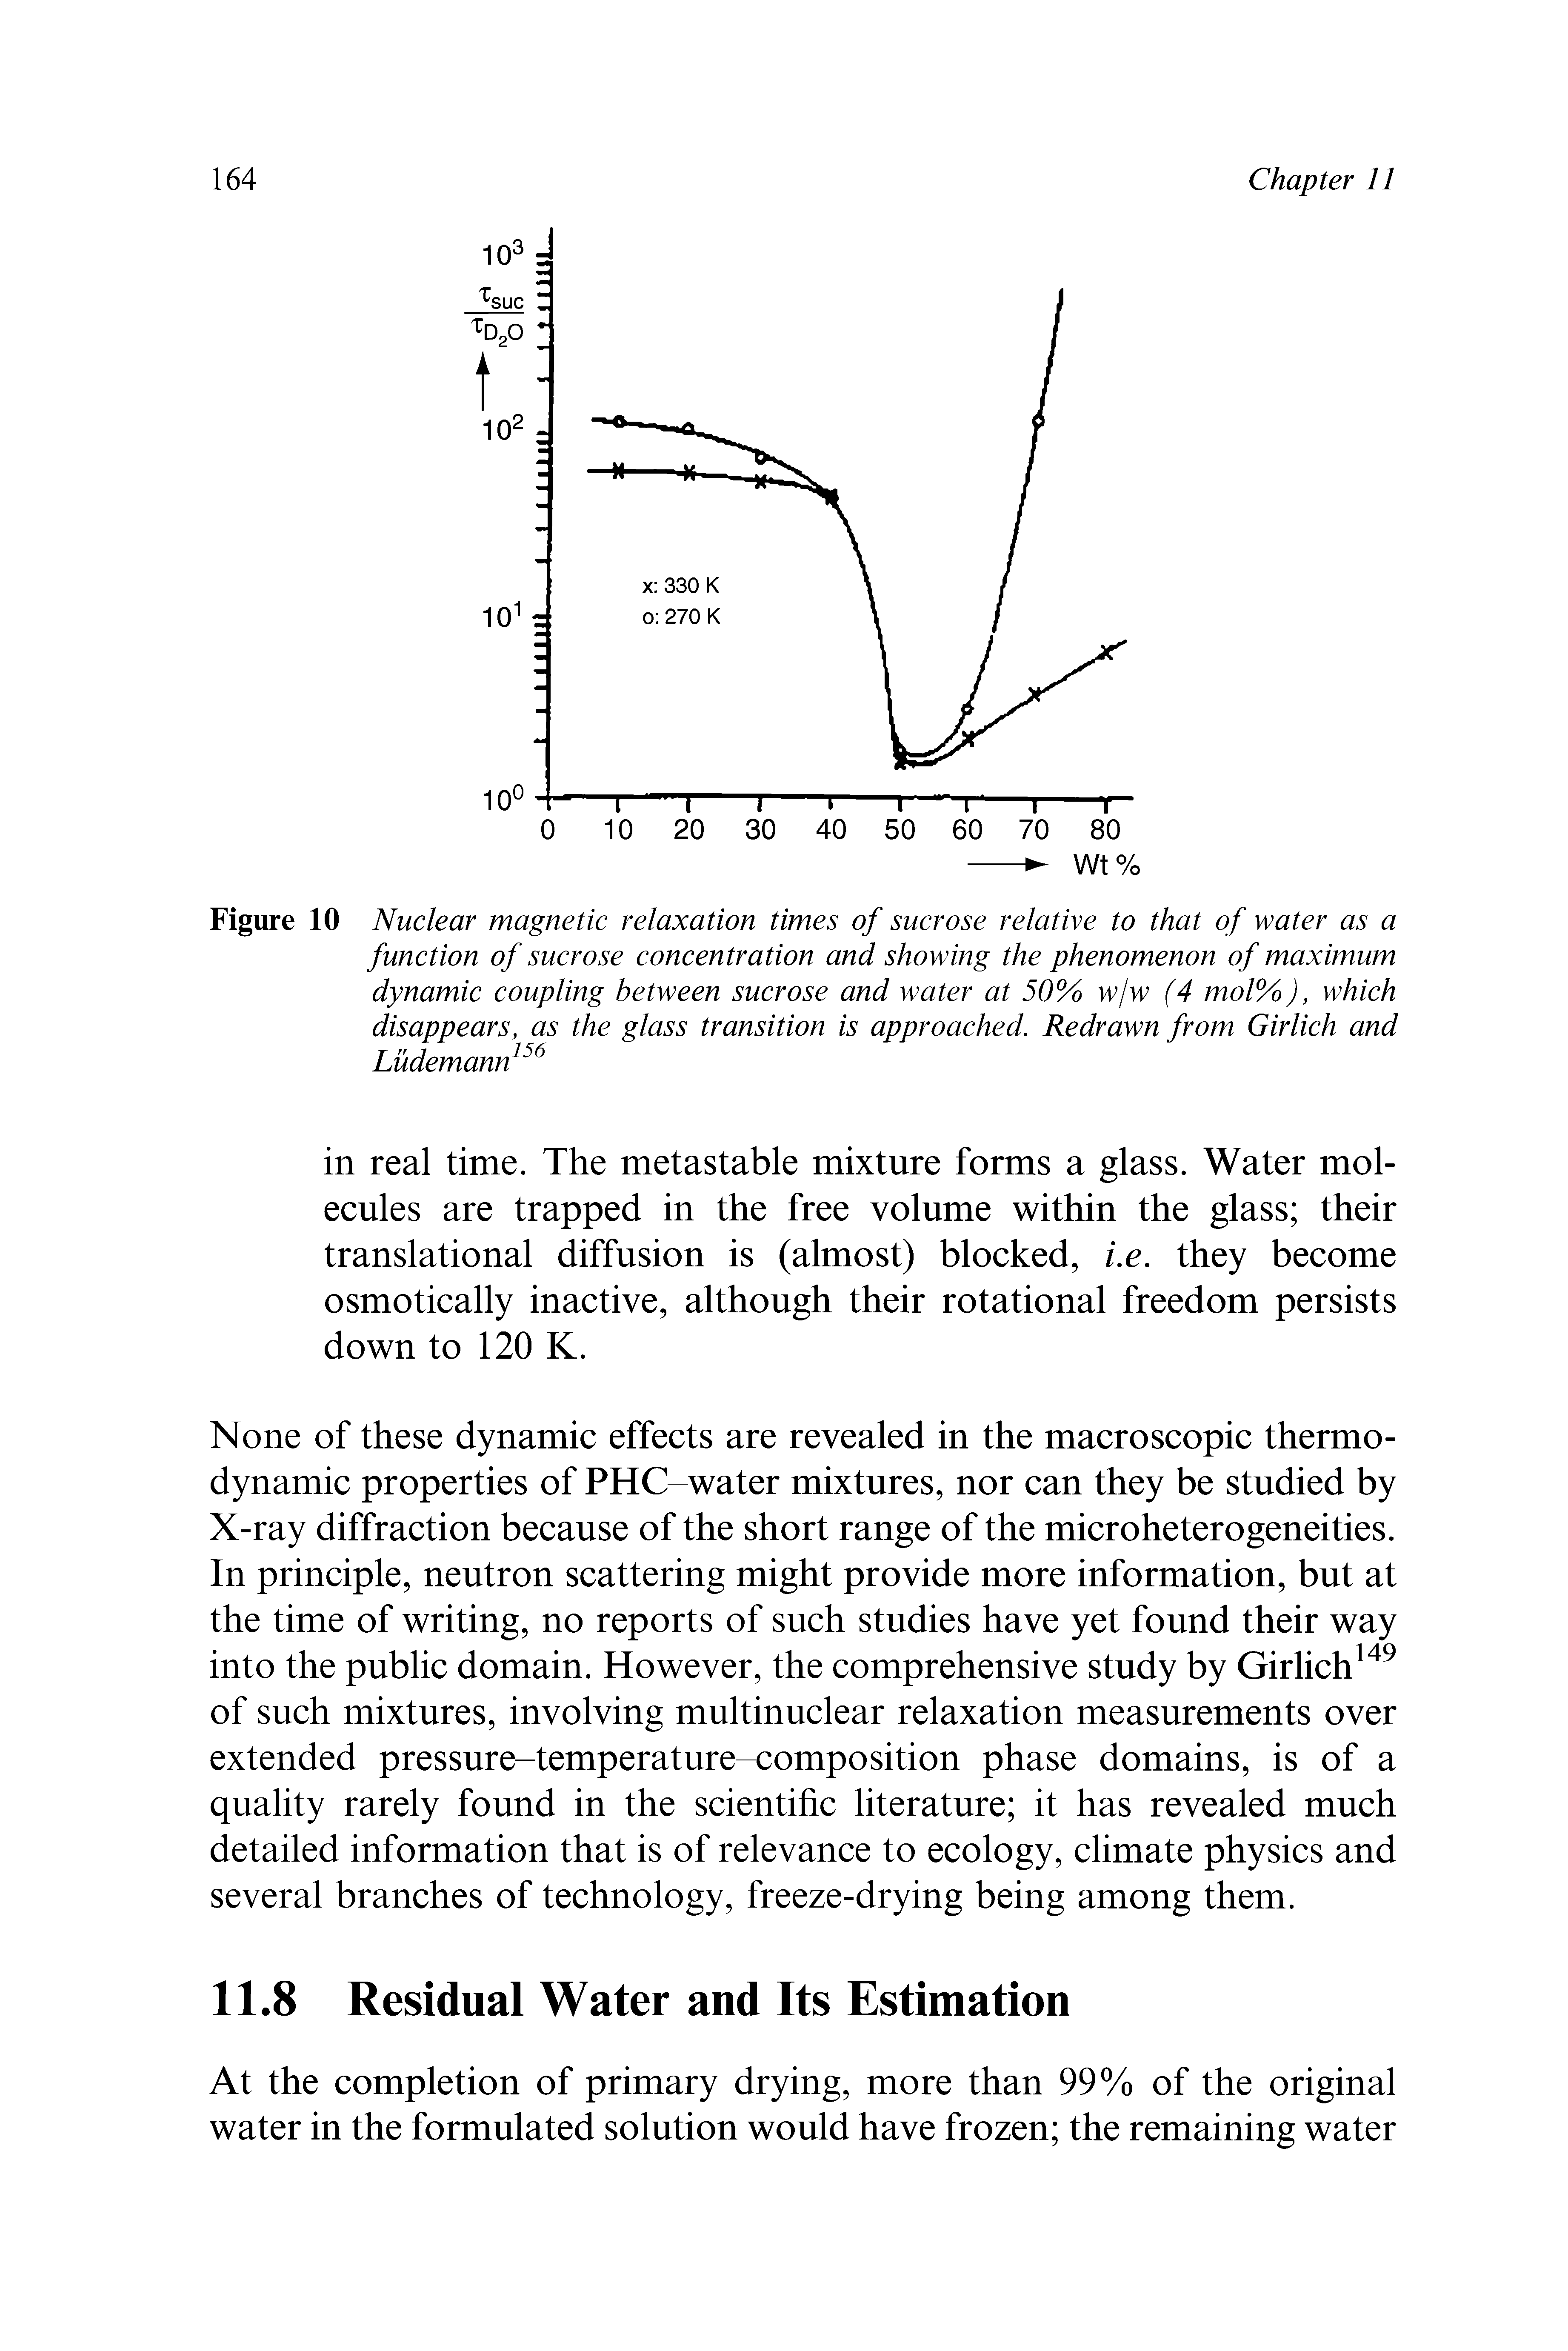 Figure 10 Nuclear magnetic relaxation times of sucrose relative to that of water as a function of sucrose concentration and showing the phenomenon of maximum dynamic coupling between sucrose and water at 50% w/w (4 mol%), which disappears, as the glass transition is approached. Redrawn from Girlich and Ludemann ...